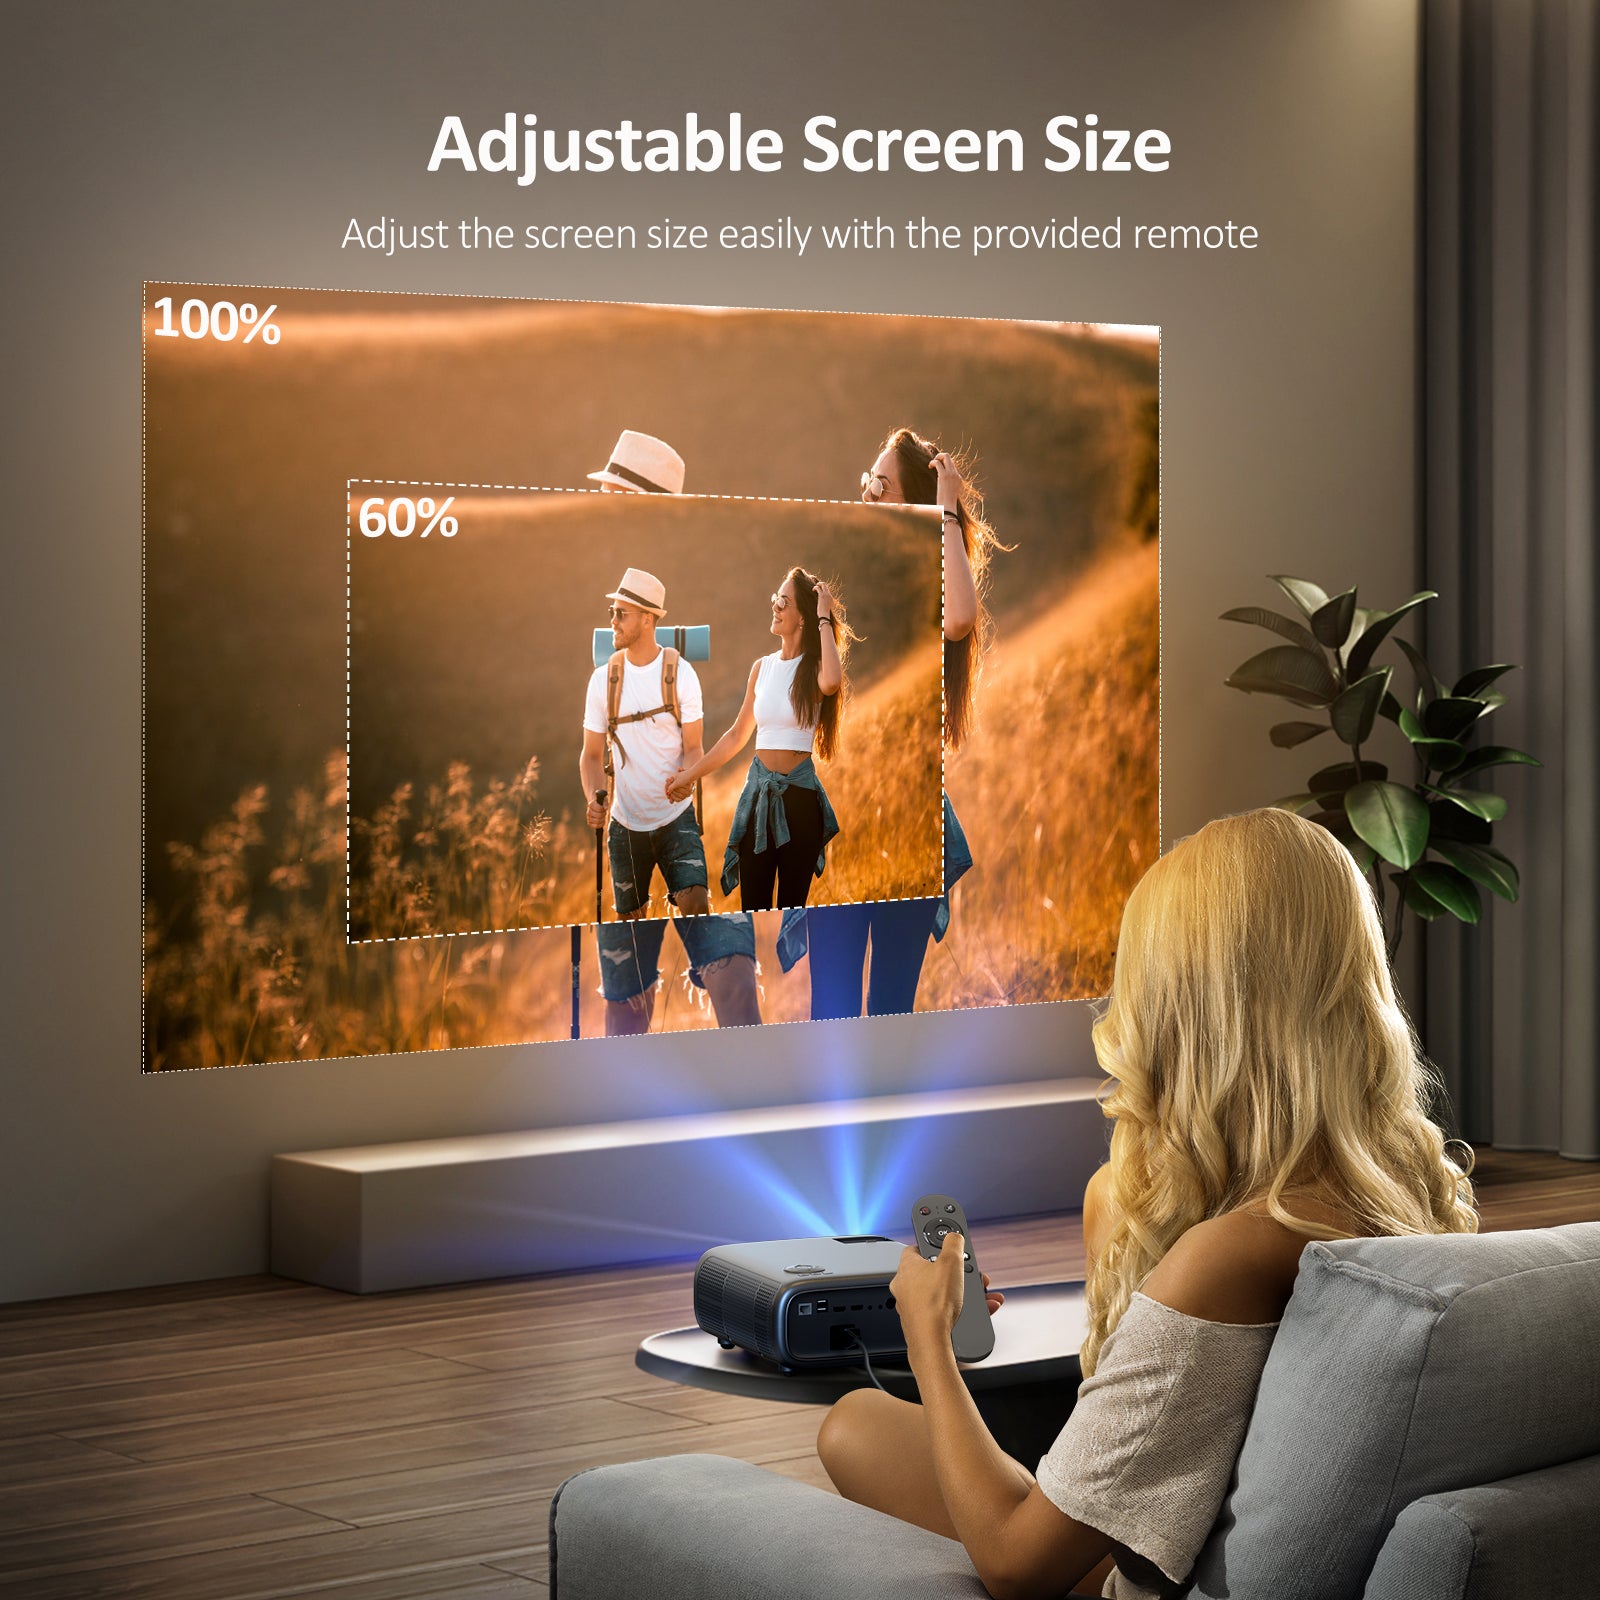 Woman adjusting projector screen size in living room with remote.